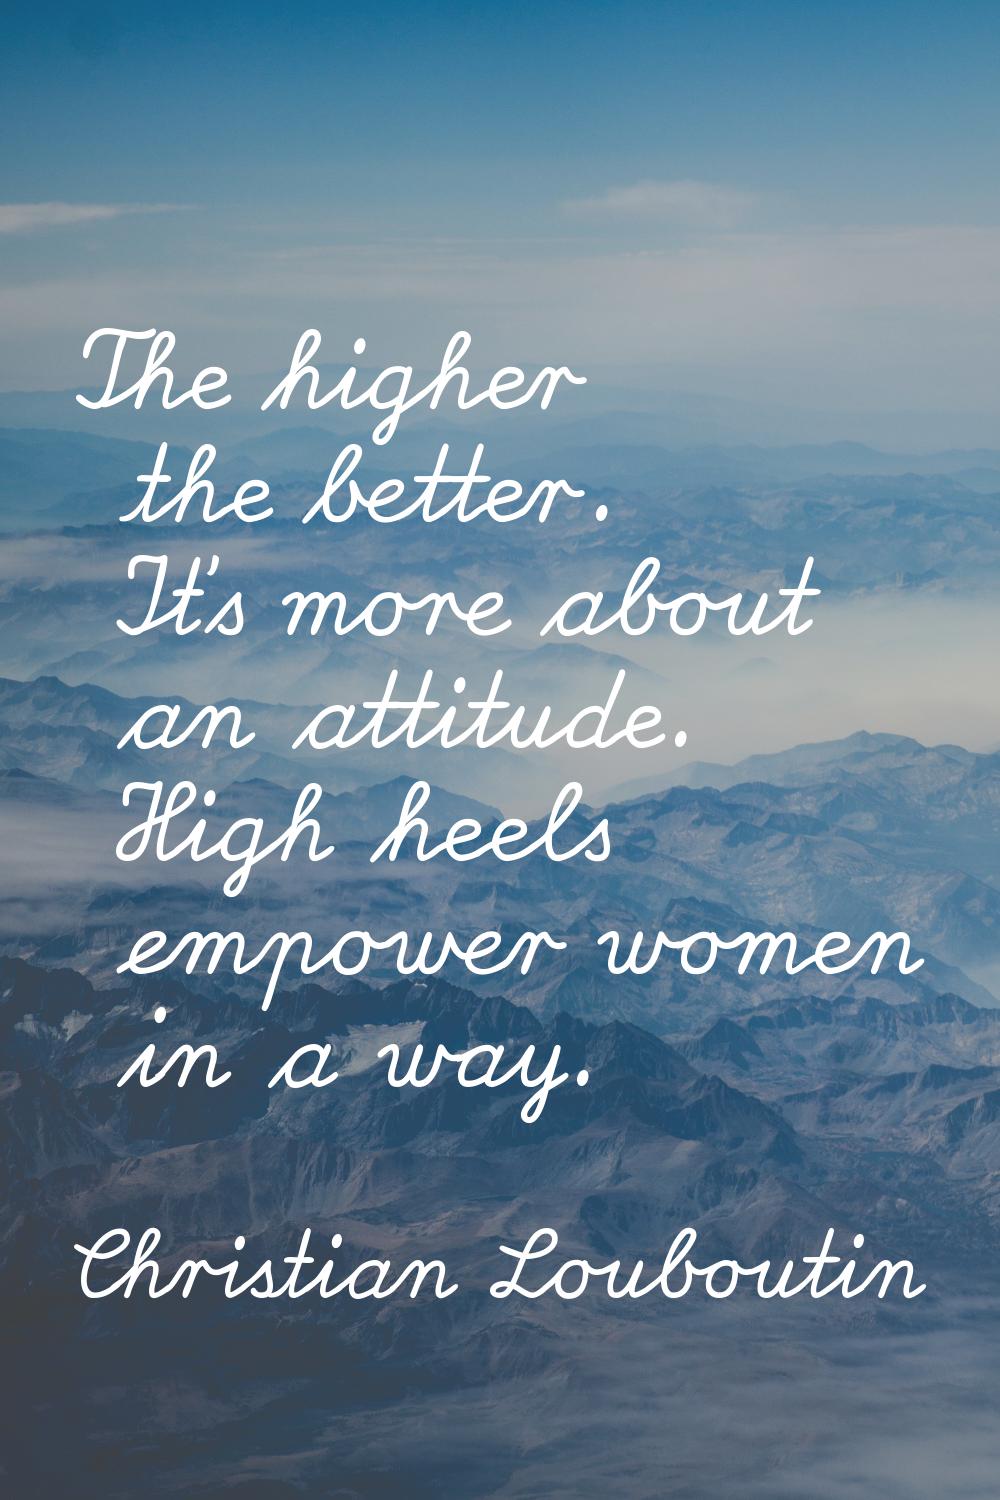 The higher the better. It's more about an attitude. High heels empower women in a way.